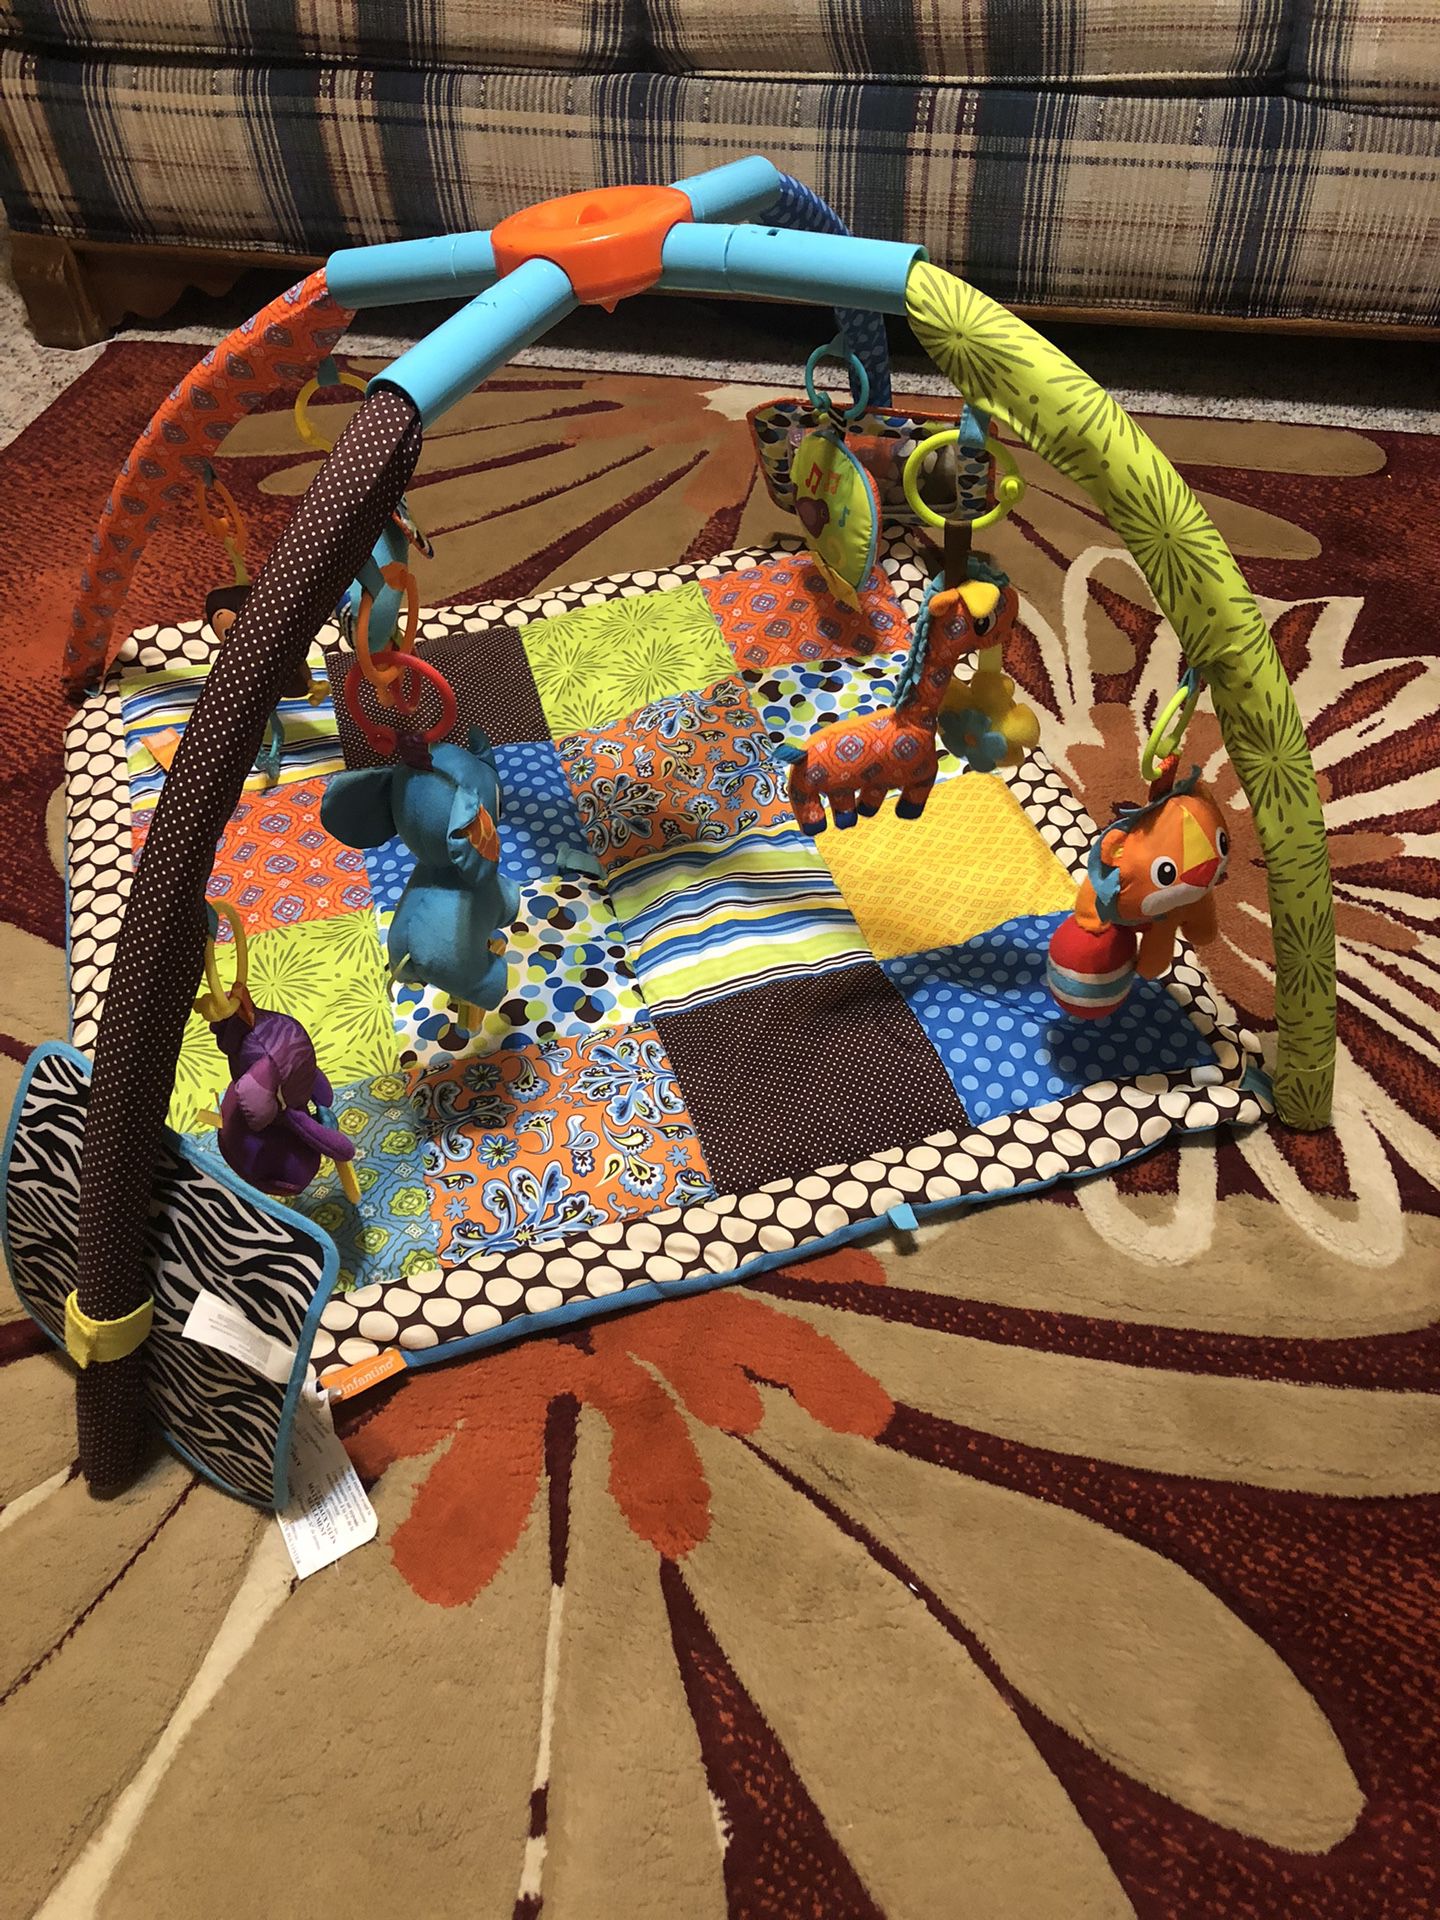 Infantino twist and fold activity gym and play mat